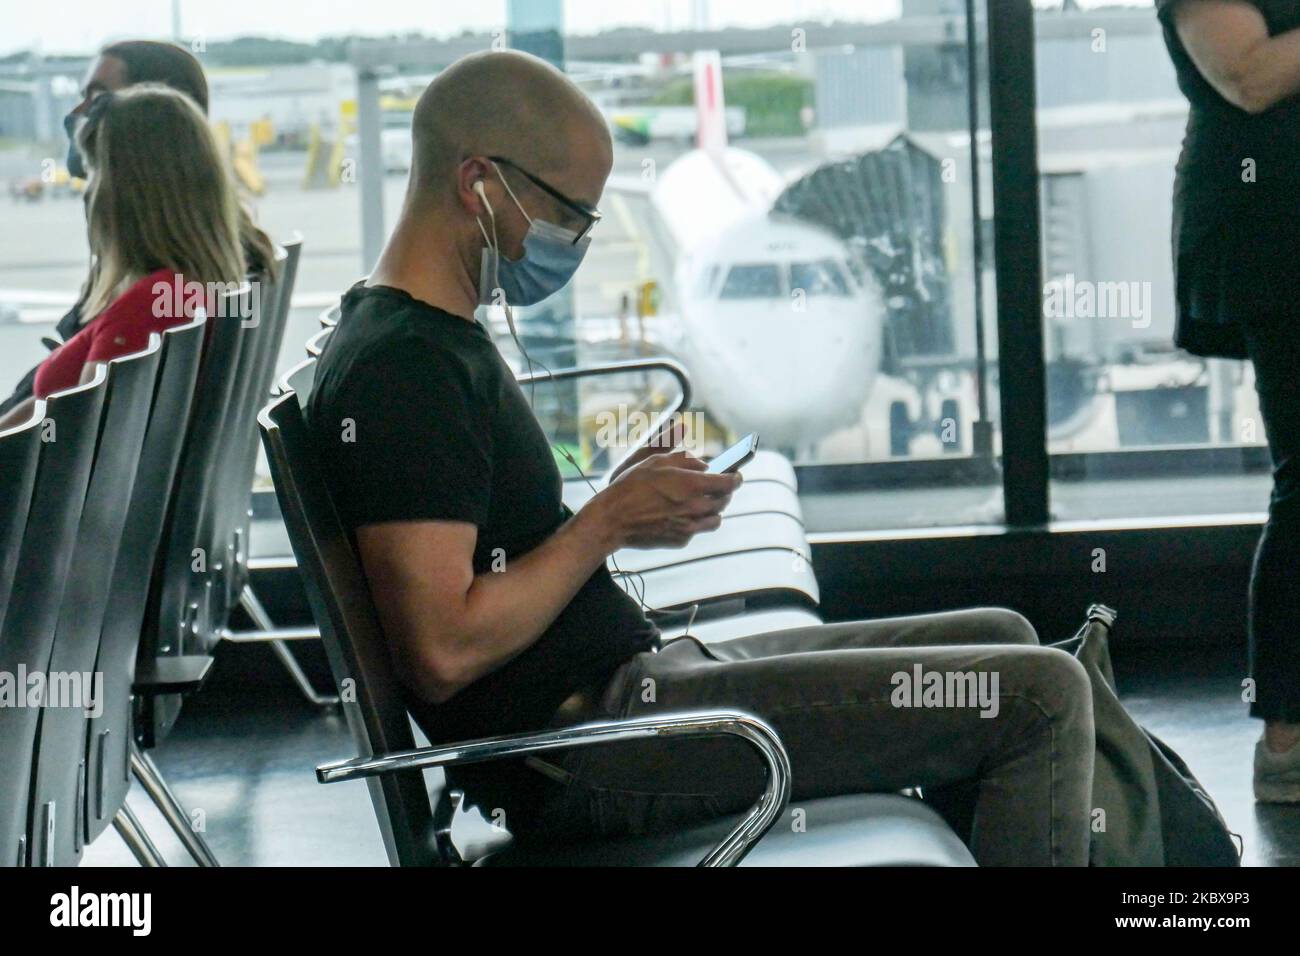 Passengers wearing facemasks, gloves and safety measures are seen at the terminal, F Gates area of Vienna International Airport VIE LOWW - Flughafen Wien-Schwechat, on July 15, 2020 serving the Austrian Capital but also Bratislava as it is 55km away from the Slovak city during the Covid-19 Coronavirus pandemic era with social distancing measures and disinfecting hand sanitizer everywhere afther the lockdown period. On July 1, Austria issues travel warning for six Balkan states countries, Serbia, Montenegro, Bosnia Herzegovina, North Macedonia, Albania and Kosovo. Passengers traveling from thos Stock Photo